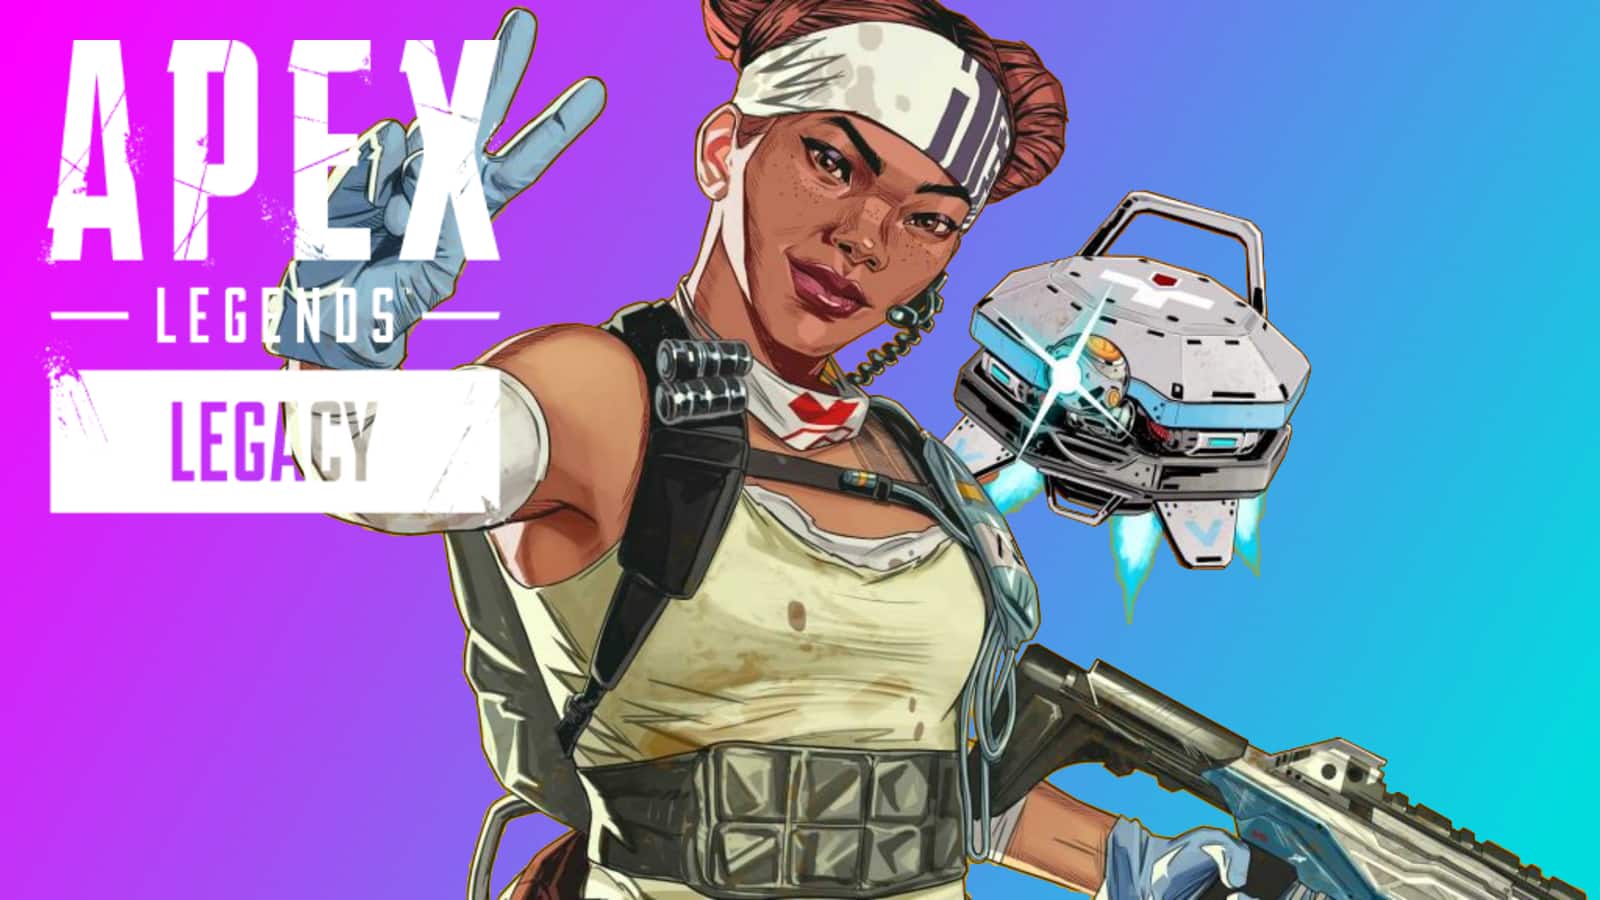 Big changes to small Legends with the Apex Legends Legacy update